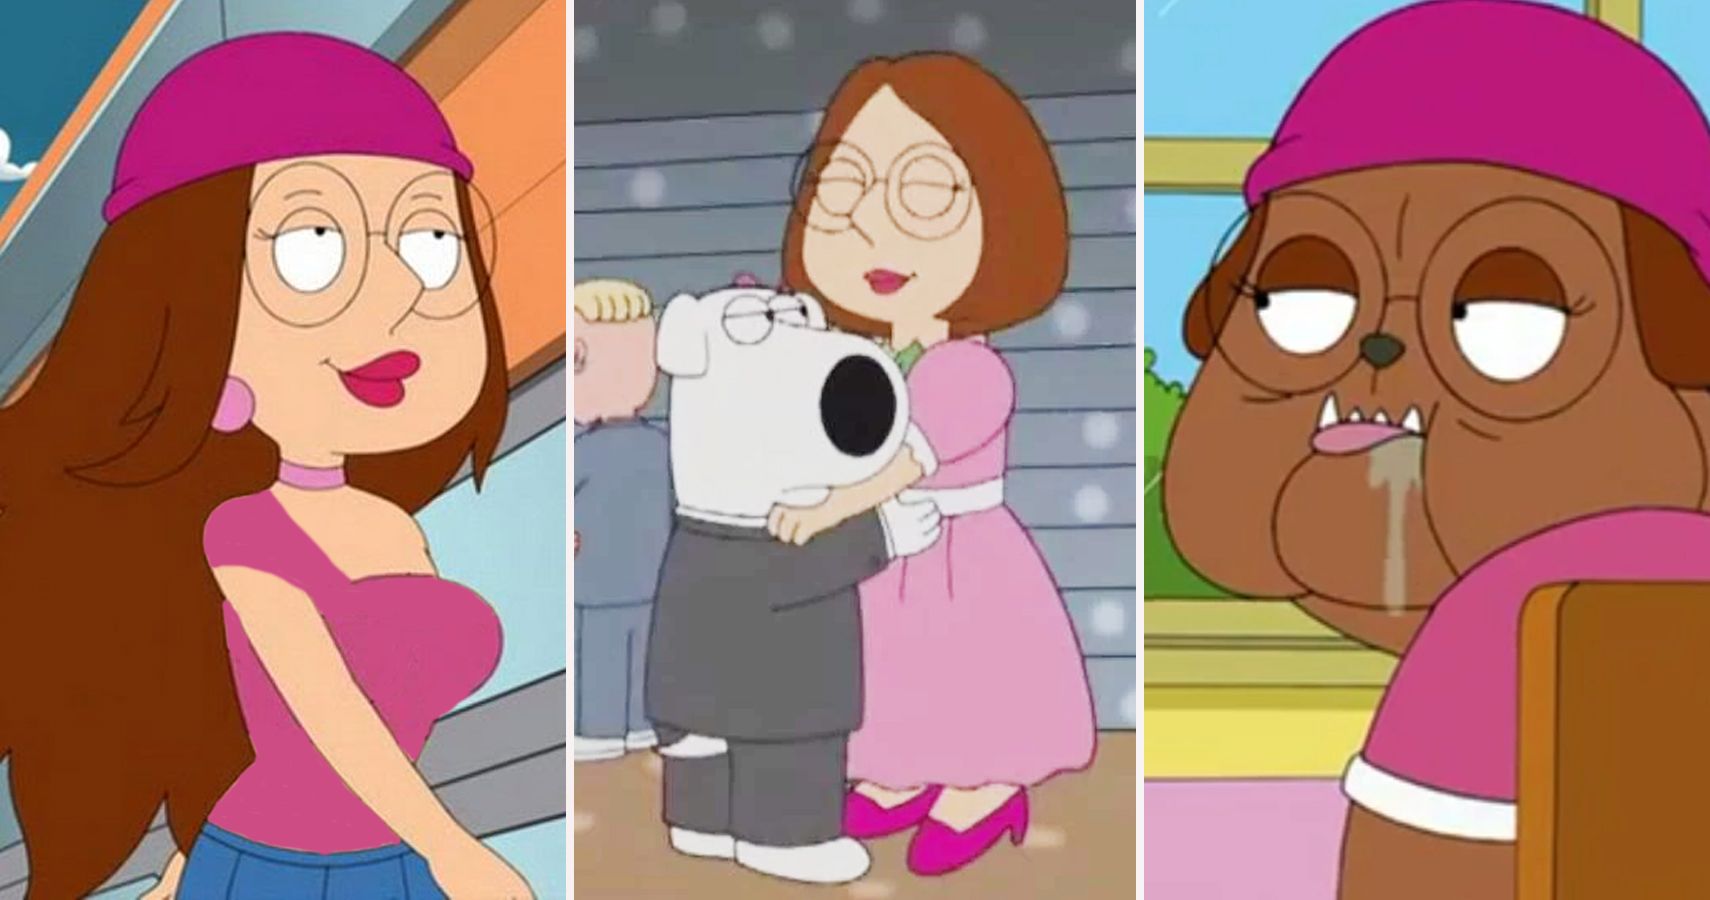 chris guarini recommends sexy meg griffin cosplay pic